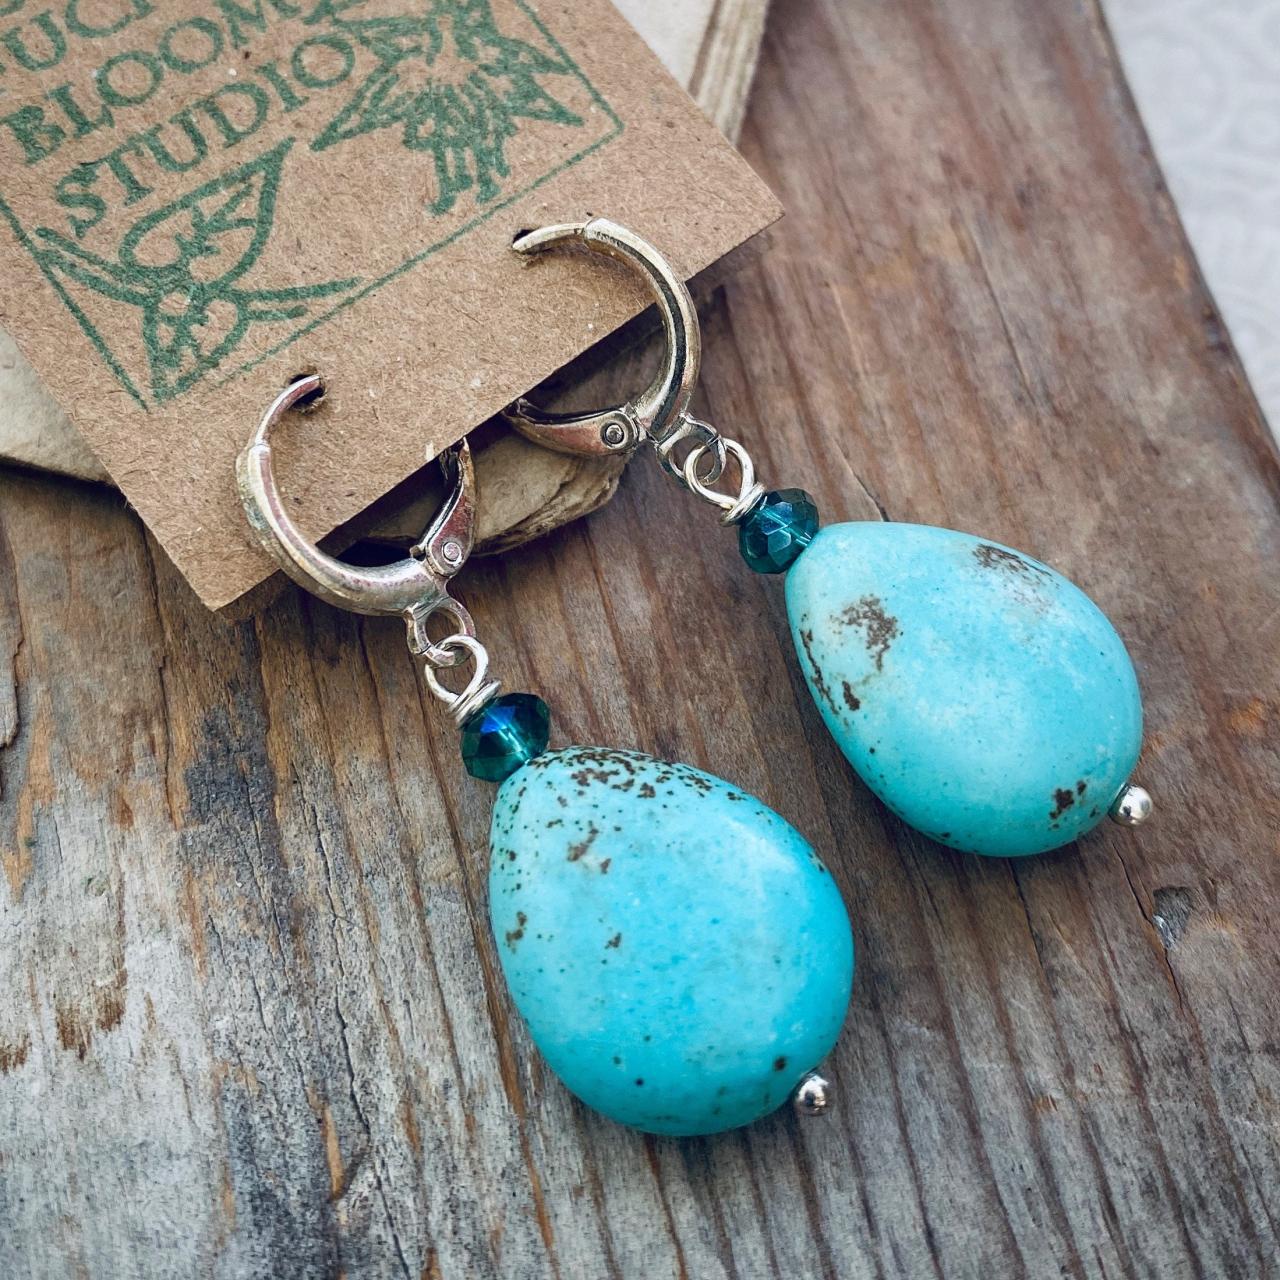 Large Turquoise Teardrop Earrings With Crystal Wire Wrapped Silver Gemstone Dangles Jewelry Boho Beachy December Birthstone